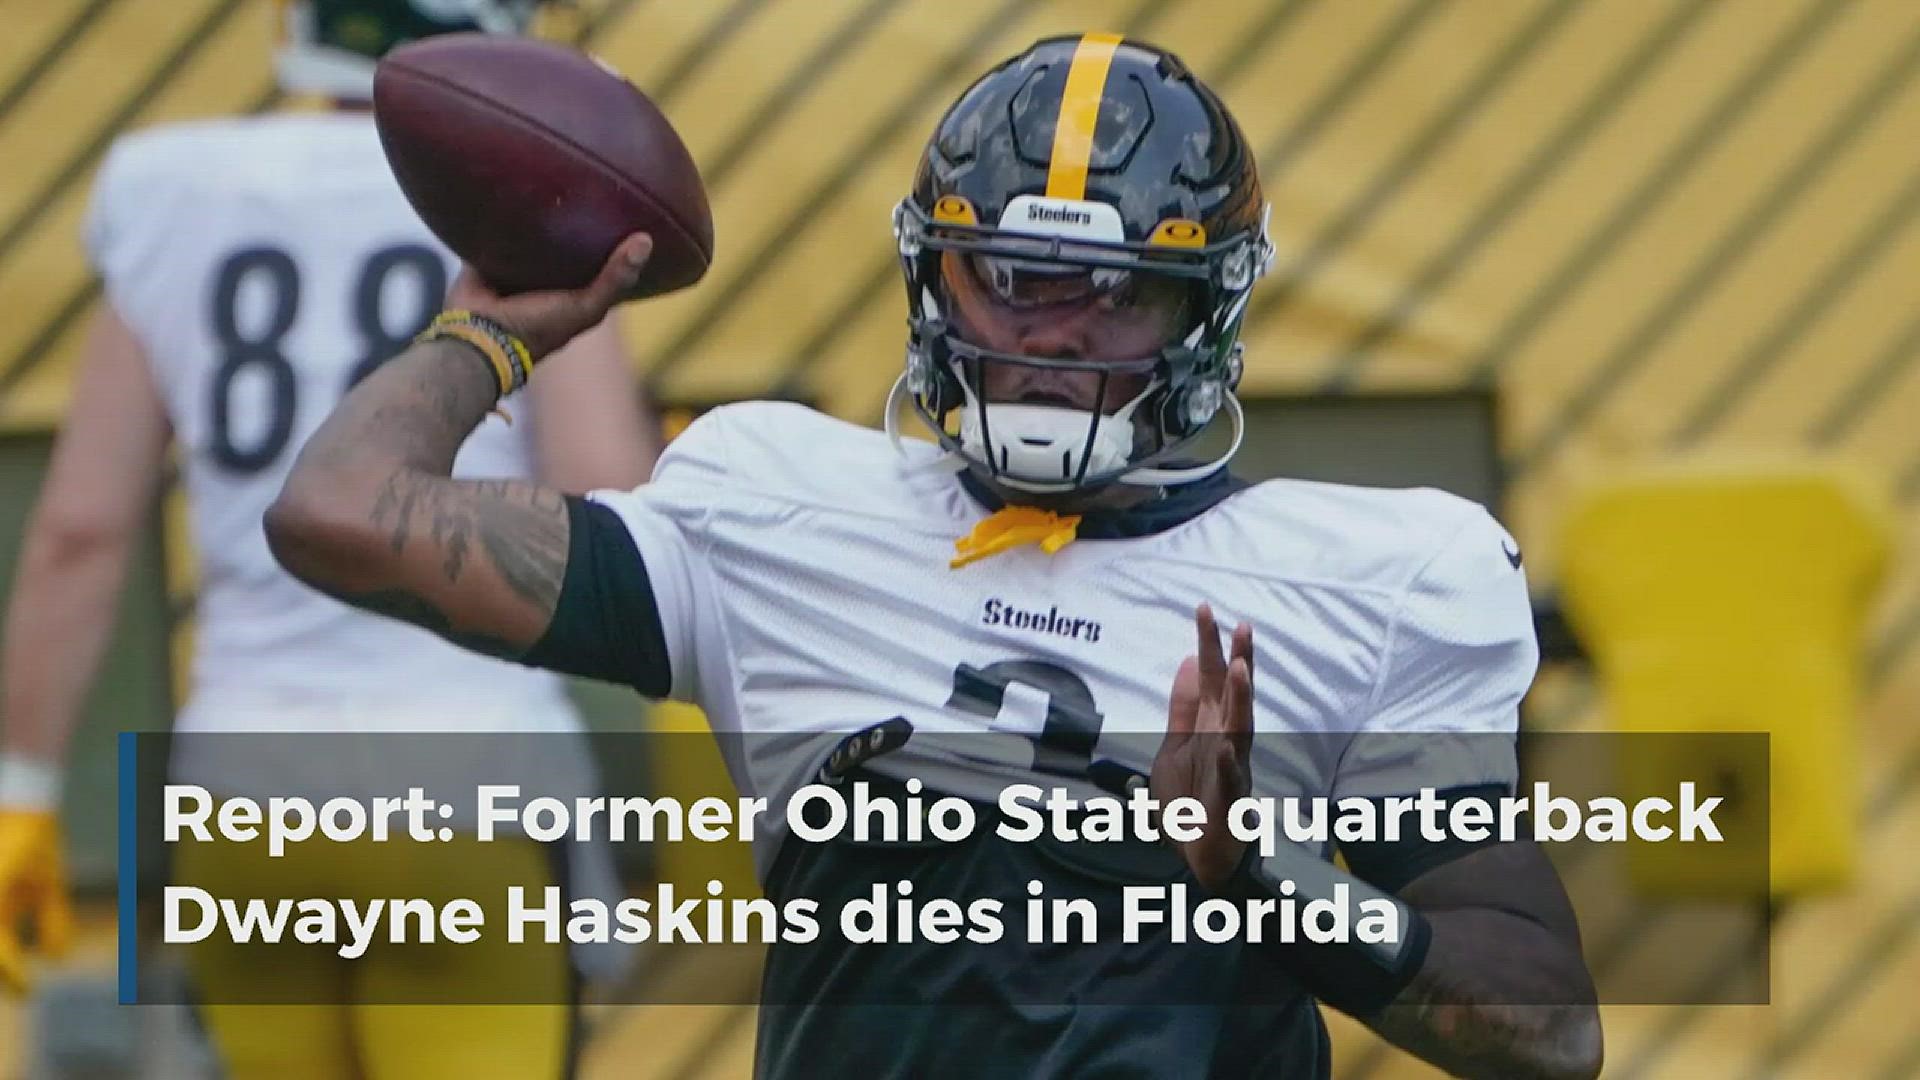 ESPN reports that Haskins was hit by a car while training in south Florida.